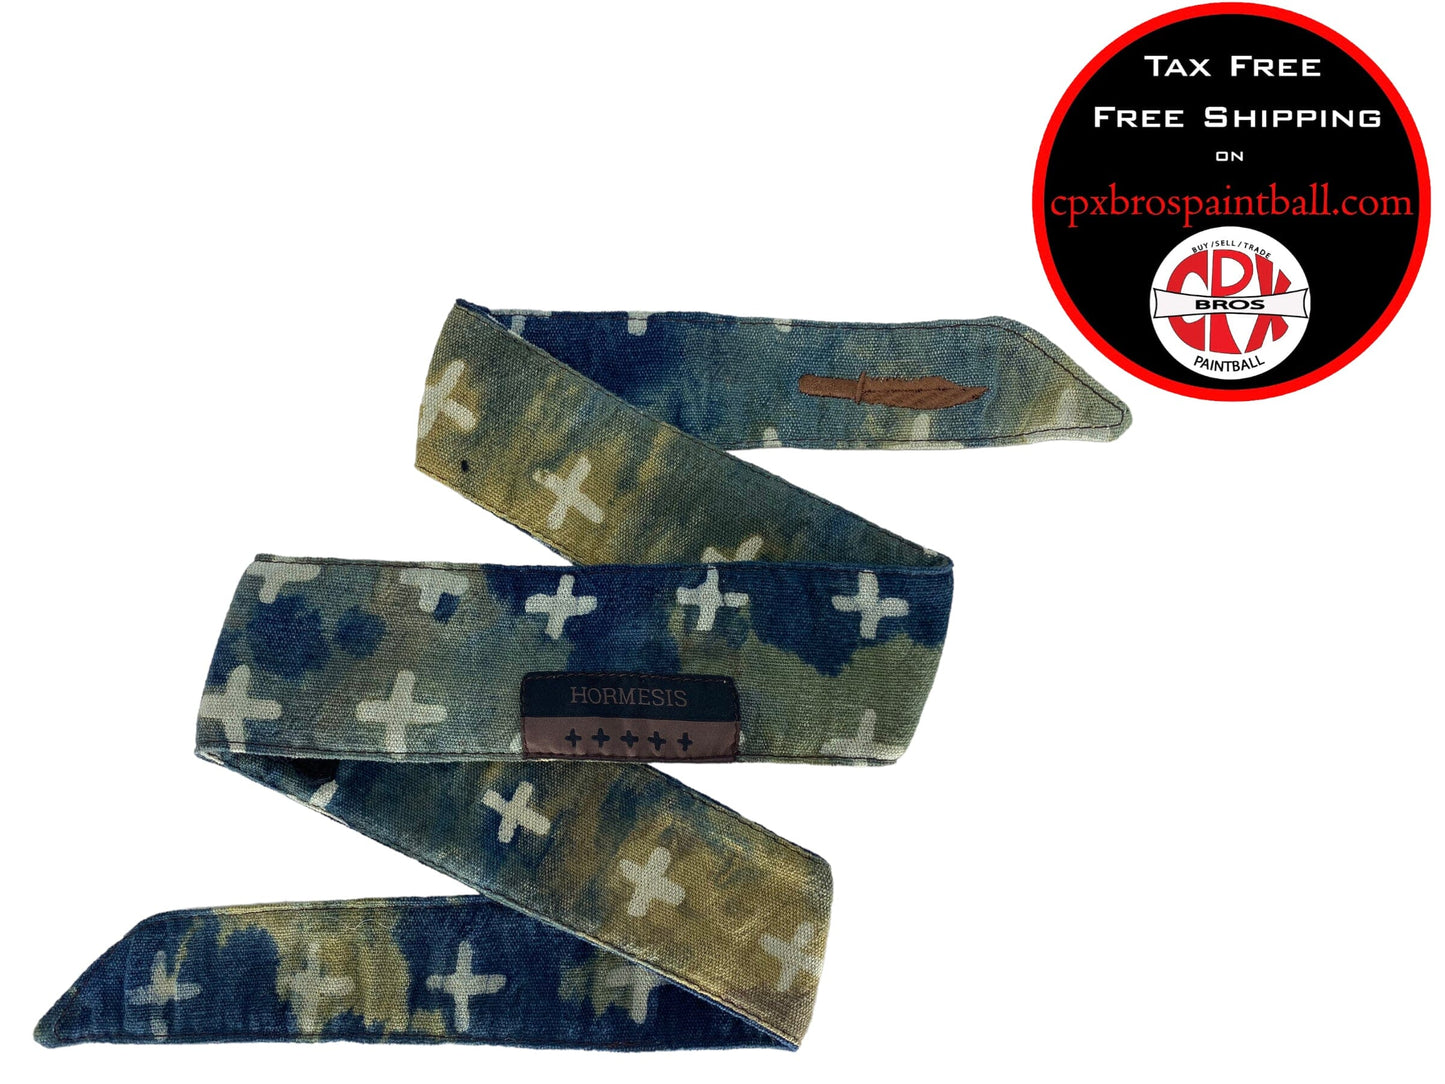 Used Hormesis Headband - The Survival Knife Series - The Rambo 149/400 Paintball Gun from CPXBrosPaintball Buy/Sell/Trade Paintball Markers, Paintball Hoppers, Paintball Masks, and Hormesis Headbands